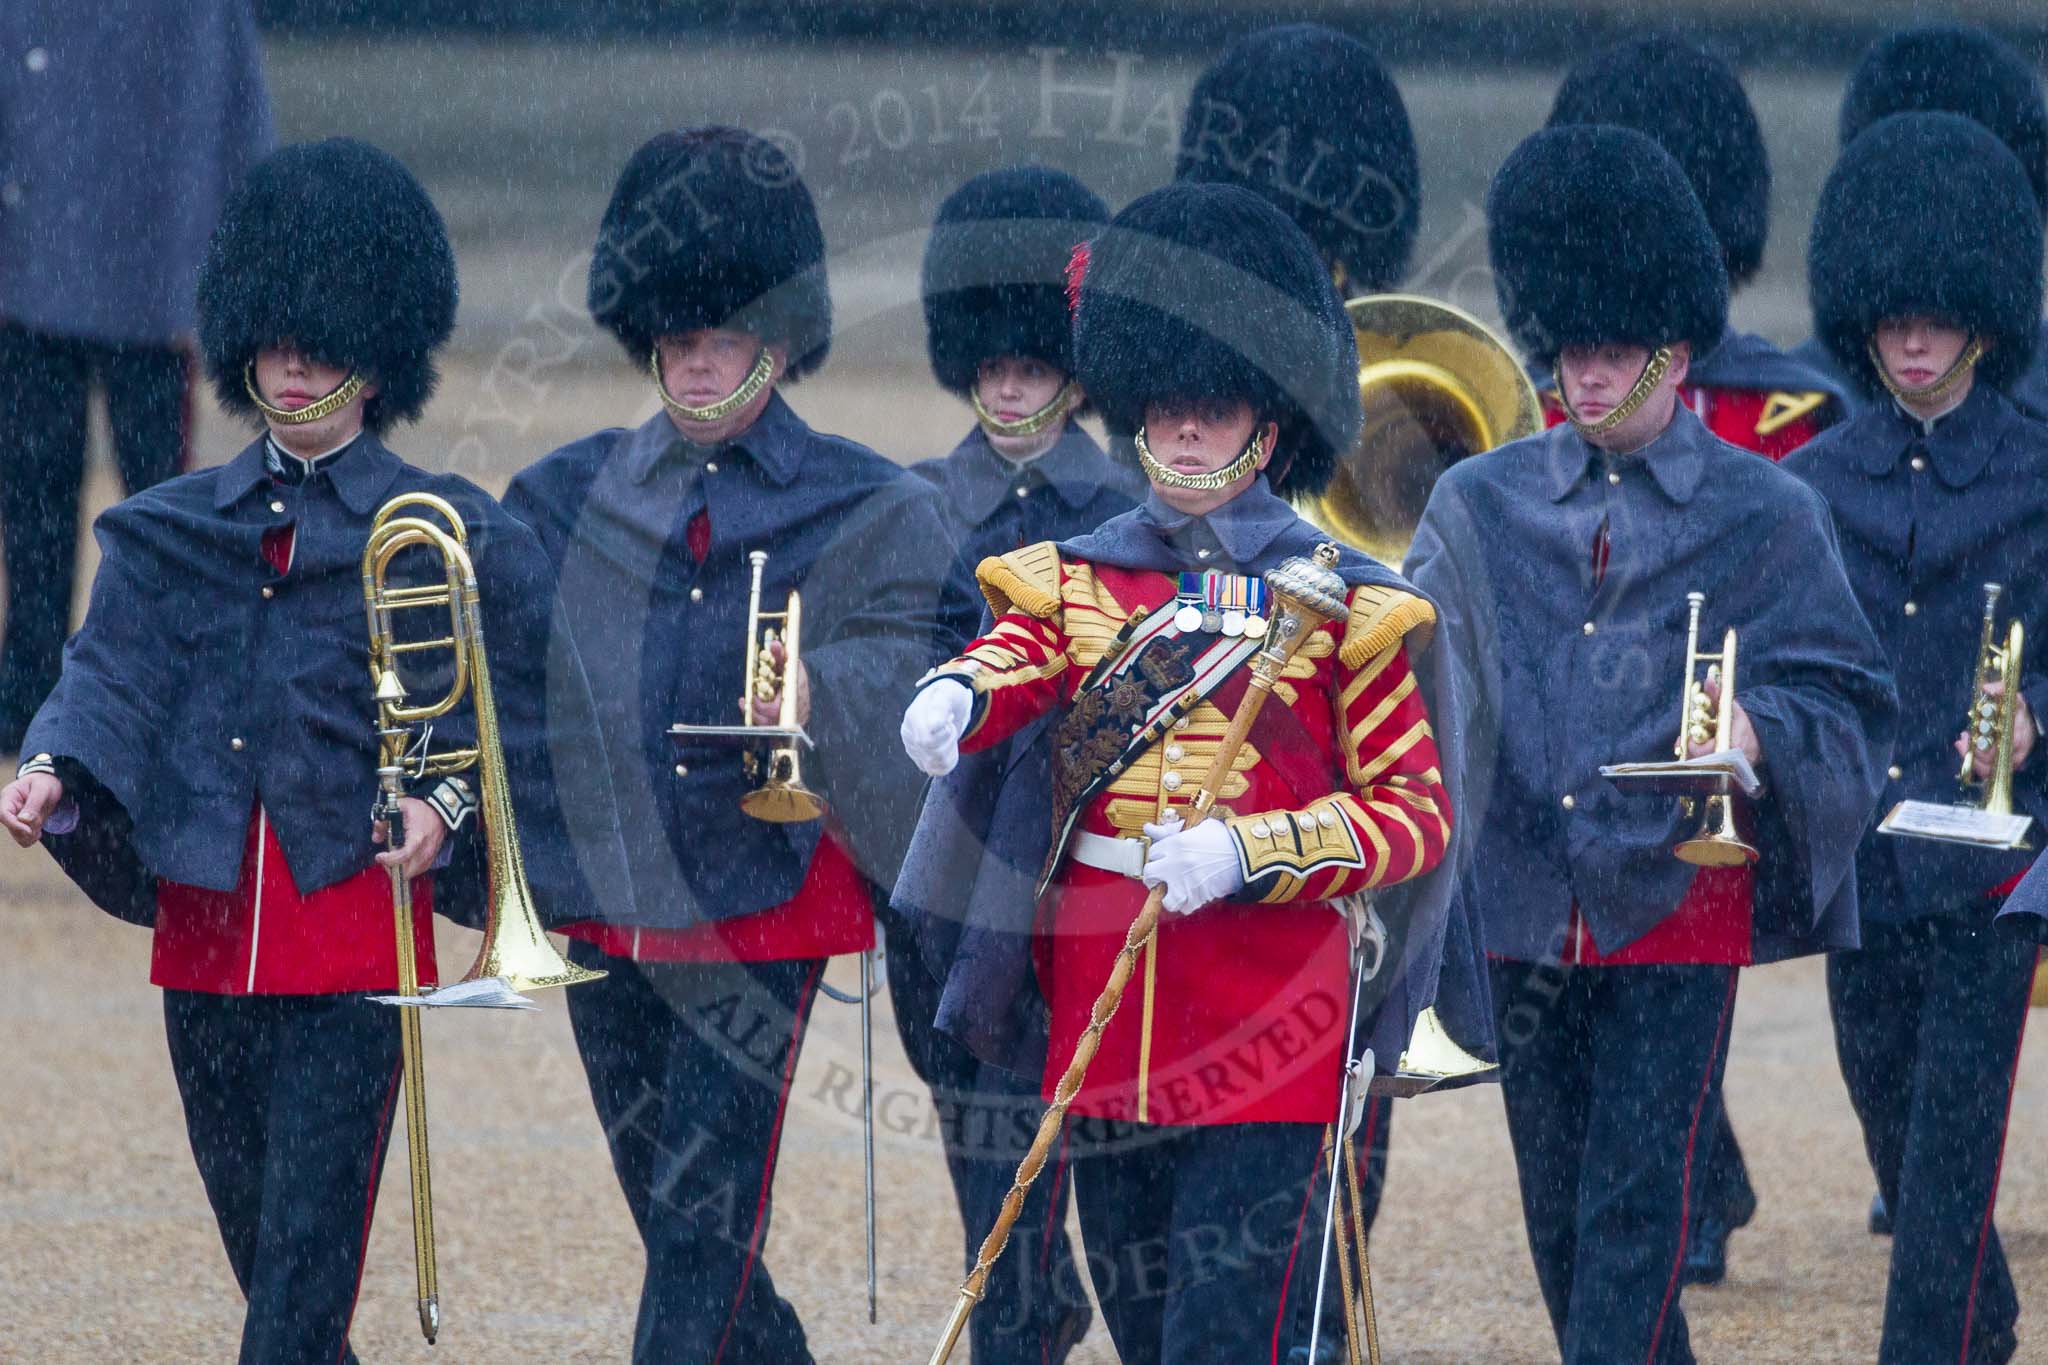 The Colonel's Review 2014.
Horse Guards Parade, Westminster,
London,

United Kingdom,
on 07 June 2014 at 10:15, image #76